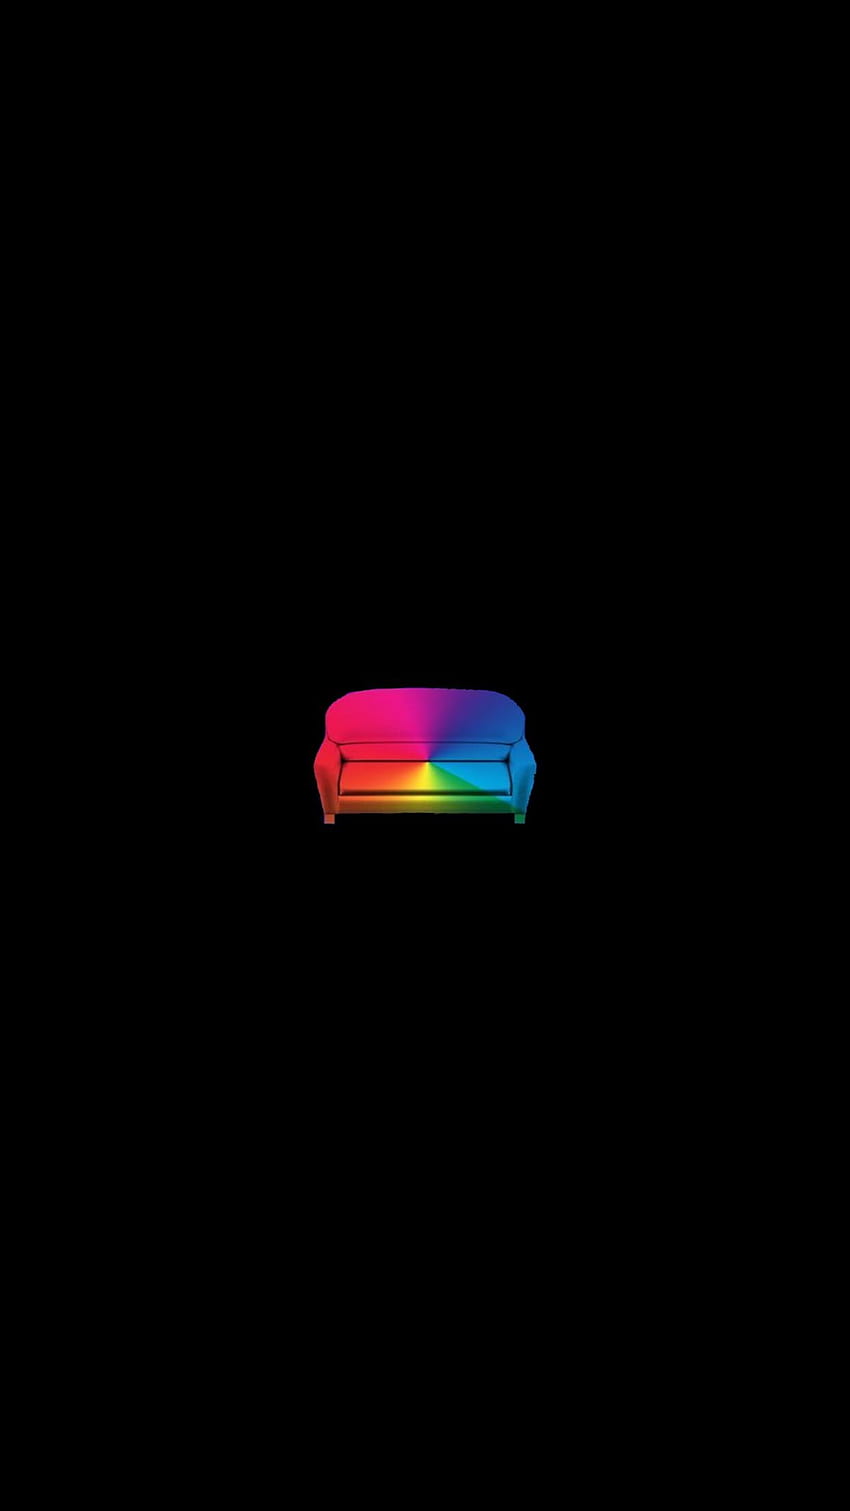 New couch logo (black), sized for iPhone Plus models. : brockhampton HD phone wallpaper